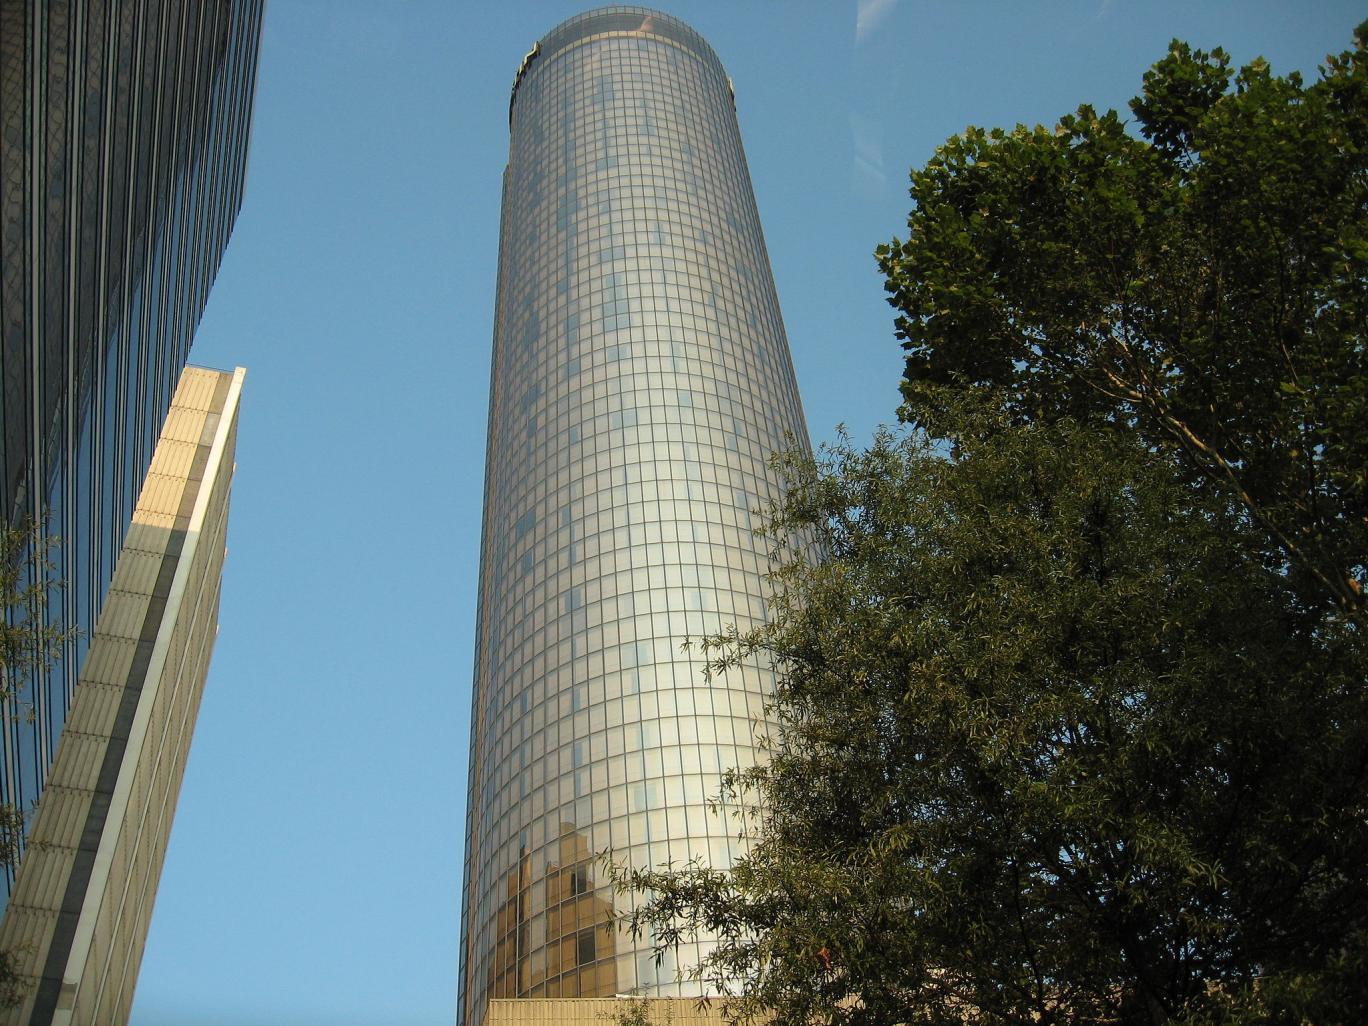 The child was having lunch with his family at the Sun Dial restaurant, which is on the 72nd storey of the Westin Peachtree Plaza skyscraper